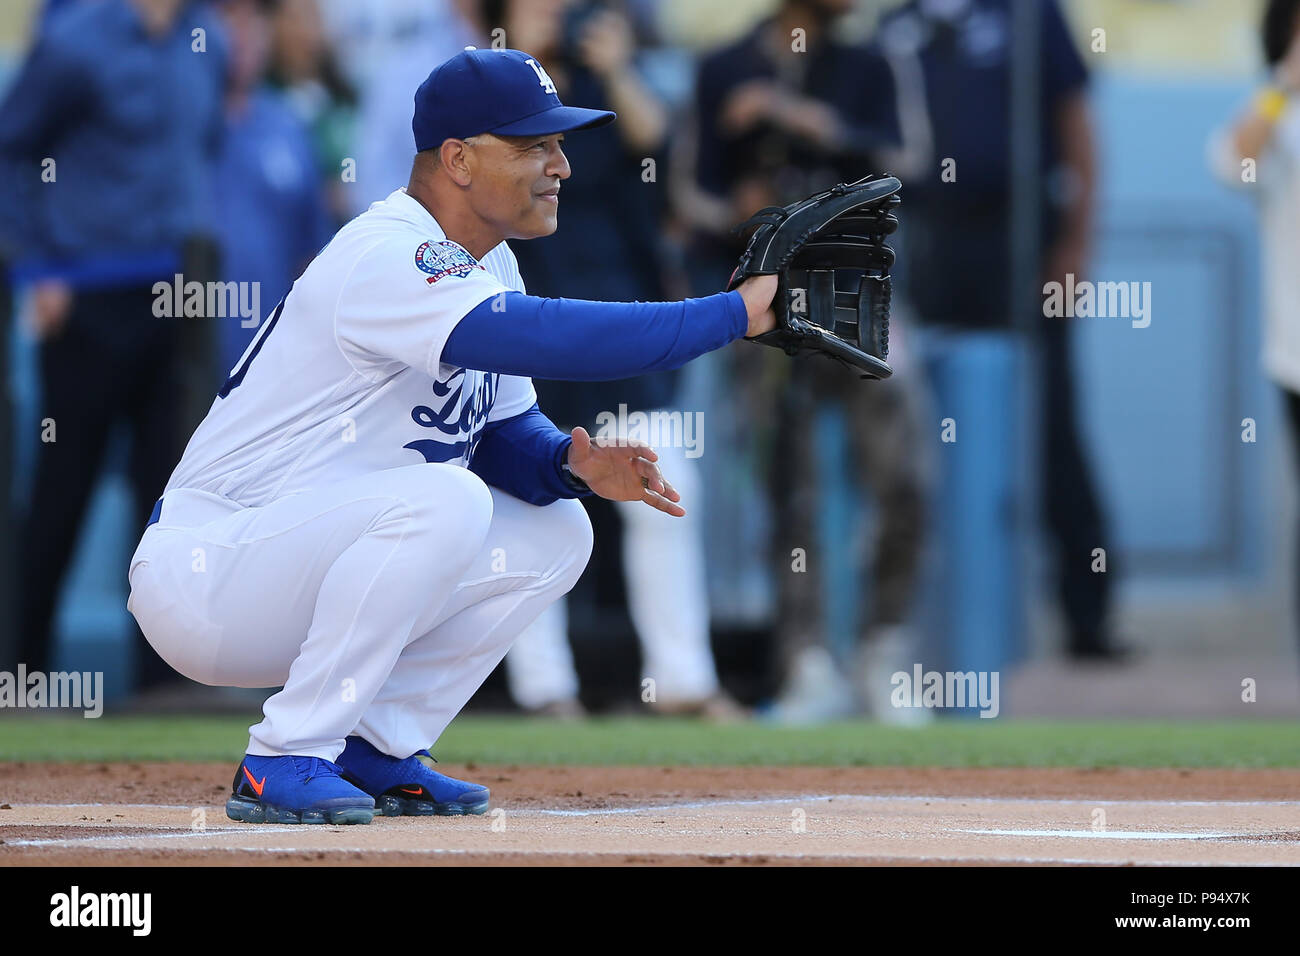 Mom throws best: Dave Roberts' mom tosses 1st pitch in LA